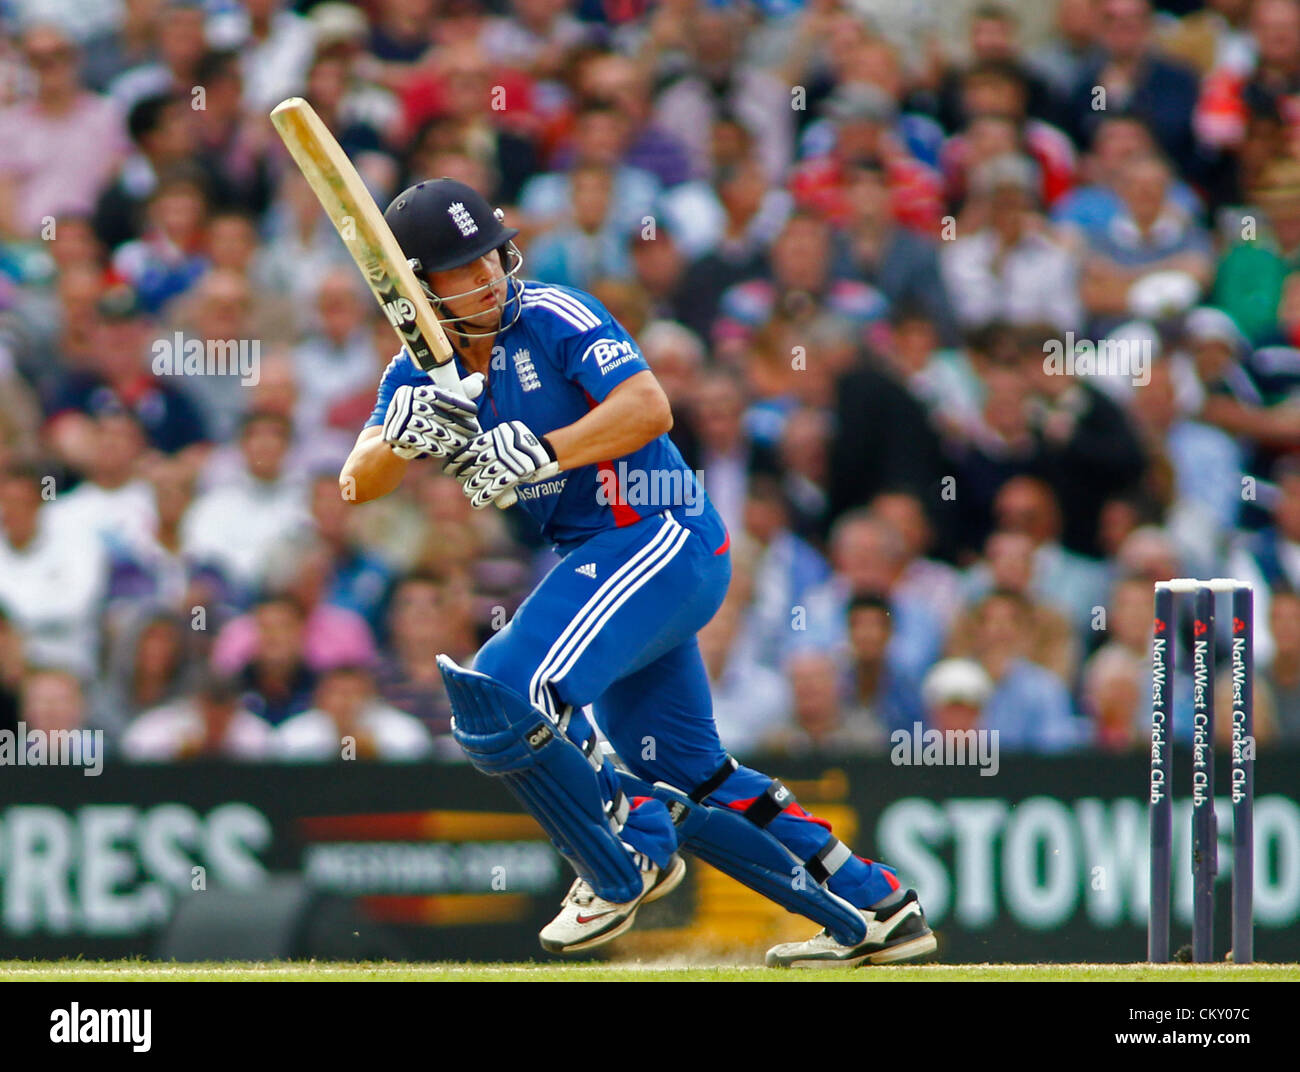 31/08/2012 London, England. England's Jonathan Trott during the 3rd Nat West one day international cricket match between  England and South Africa and played at The Kia Oval Cricket Ground: Mandatory credit: Mitchell Gunn Stock Photo